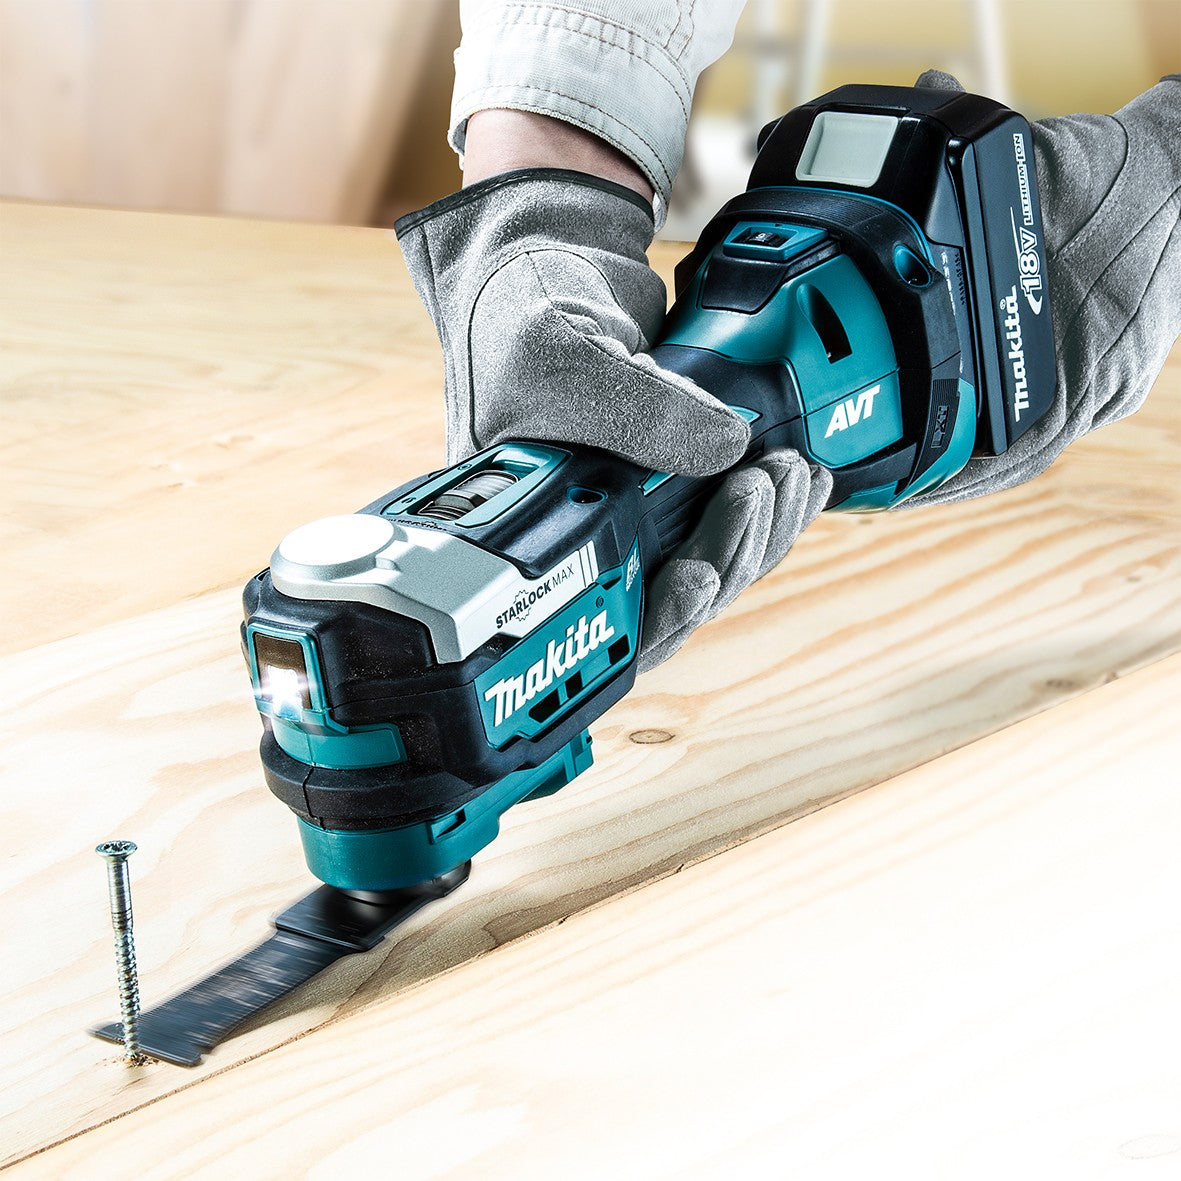 18V Brushless Multi Tool Bare (Tool Only) DTM52ZX3 by Makita